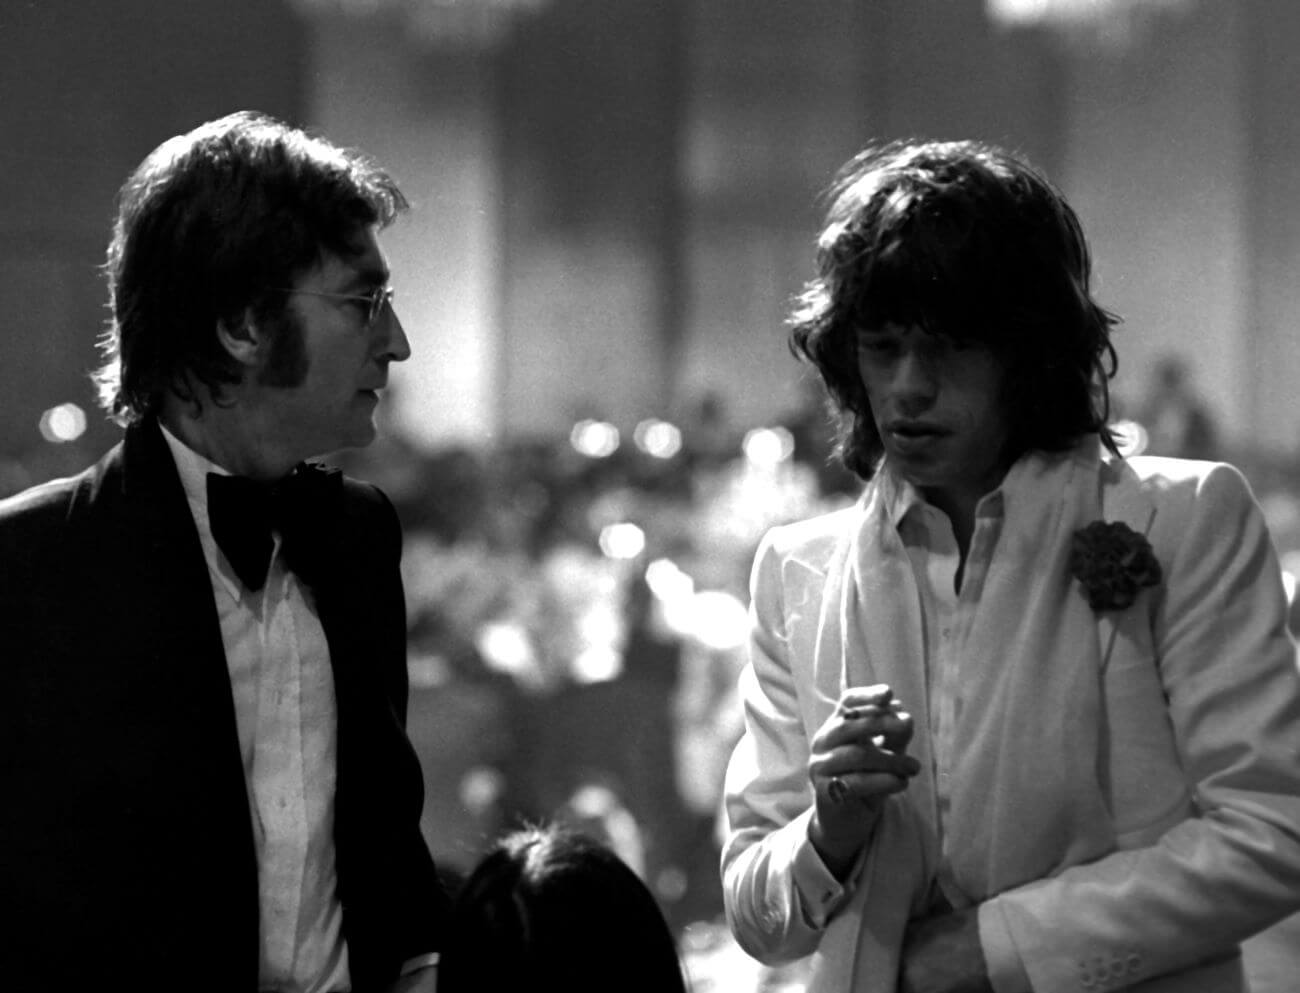 A black and white picture of John Lennon and Mick Jagger standing together. Jagger has a cigarette.